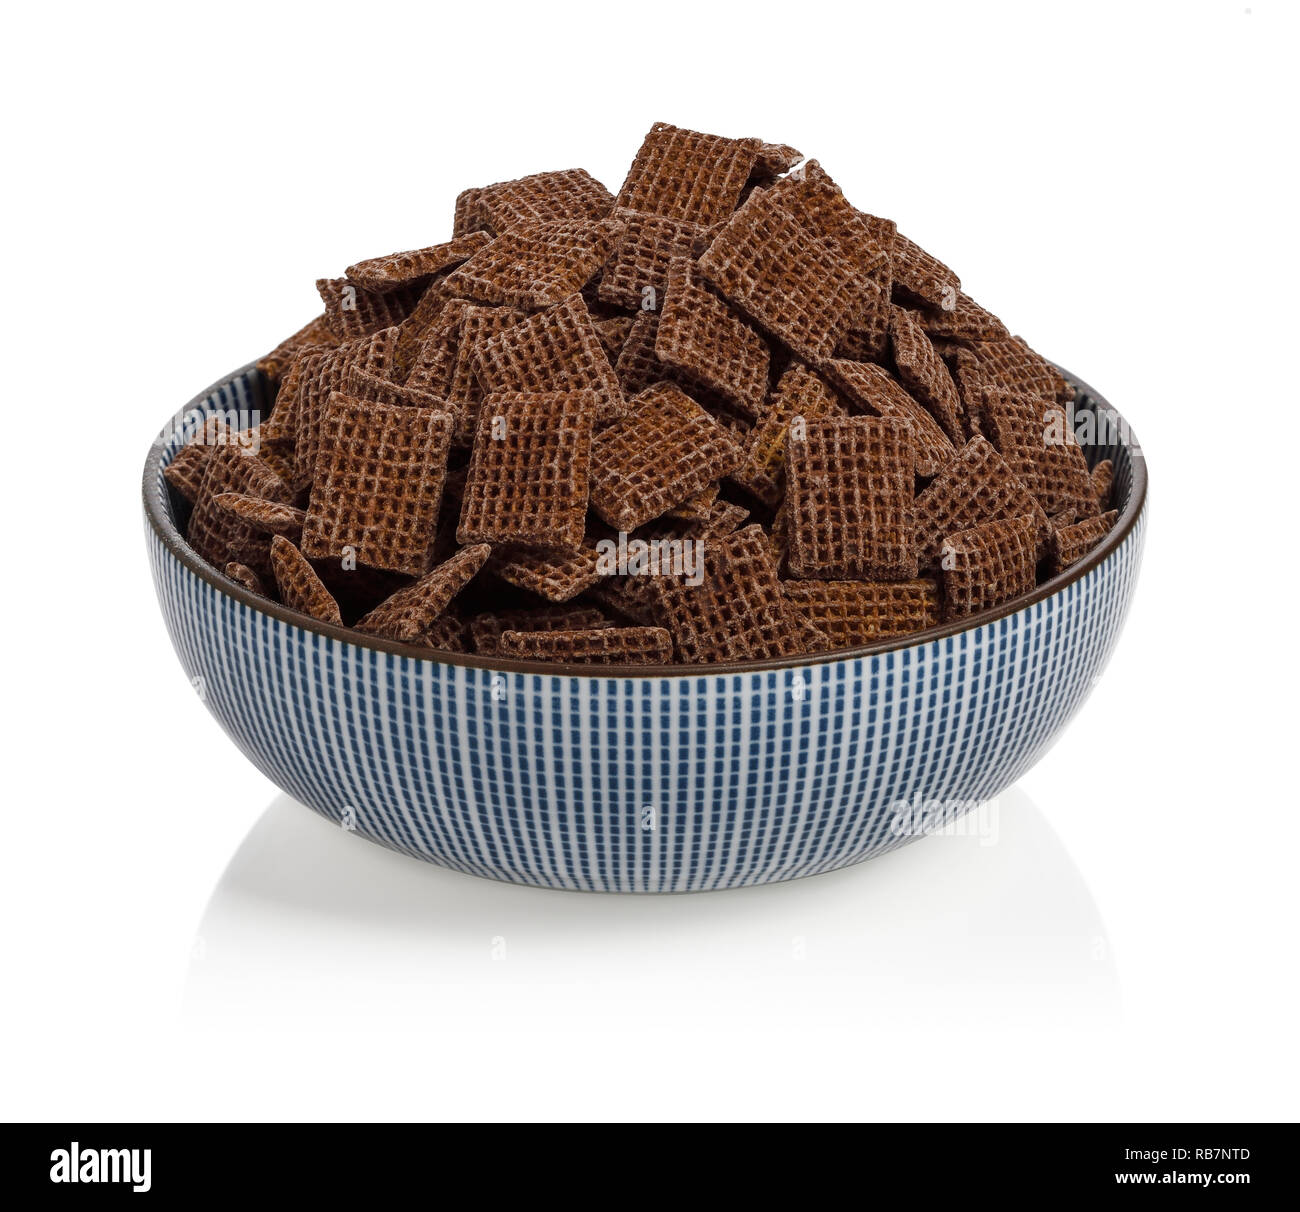 A bowl filled with Nestle Coco Shreddies breakfast cereal Stock Photo